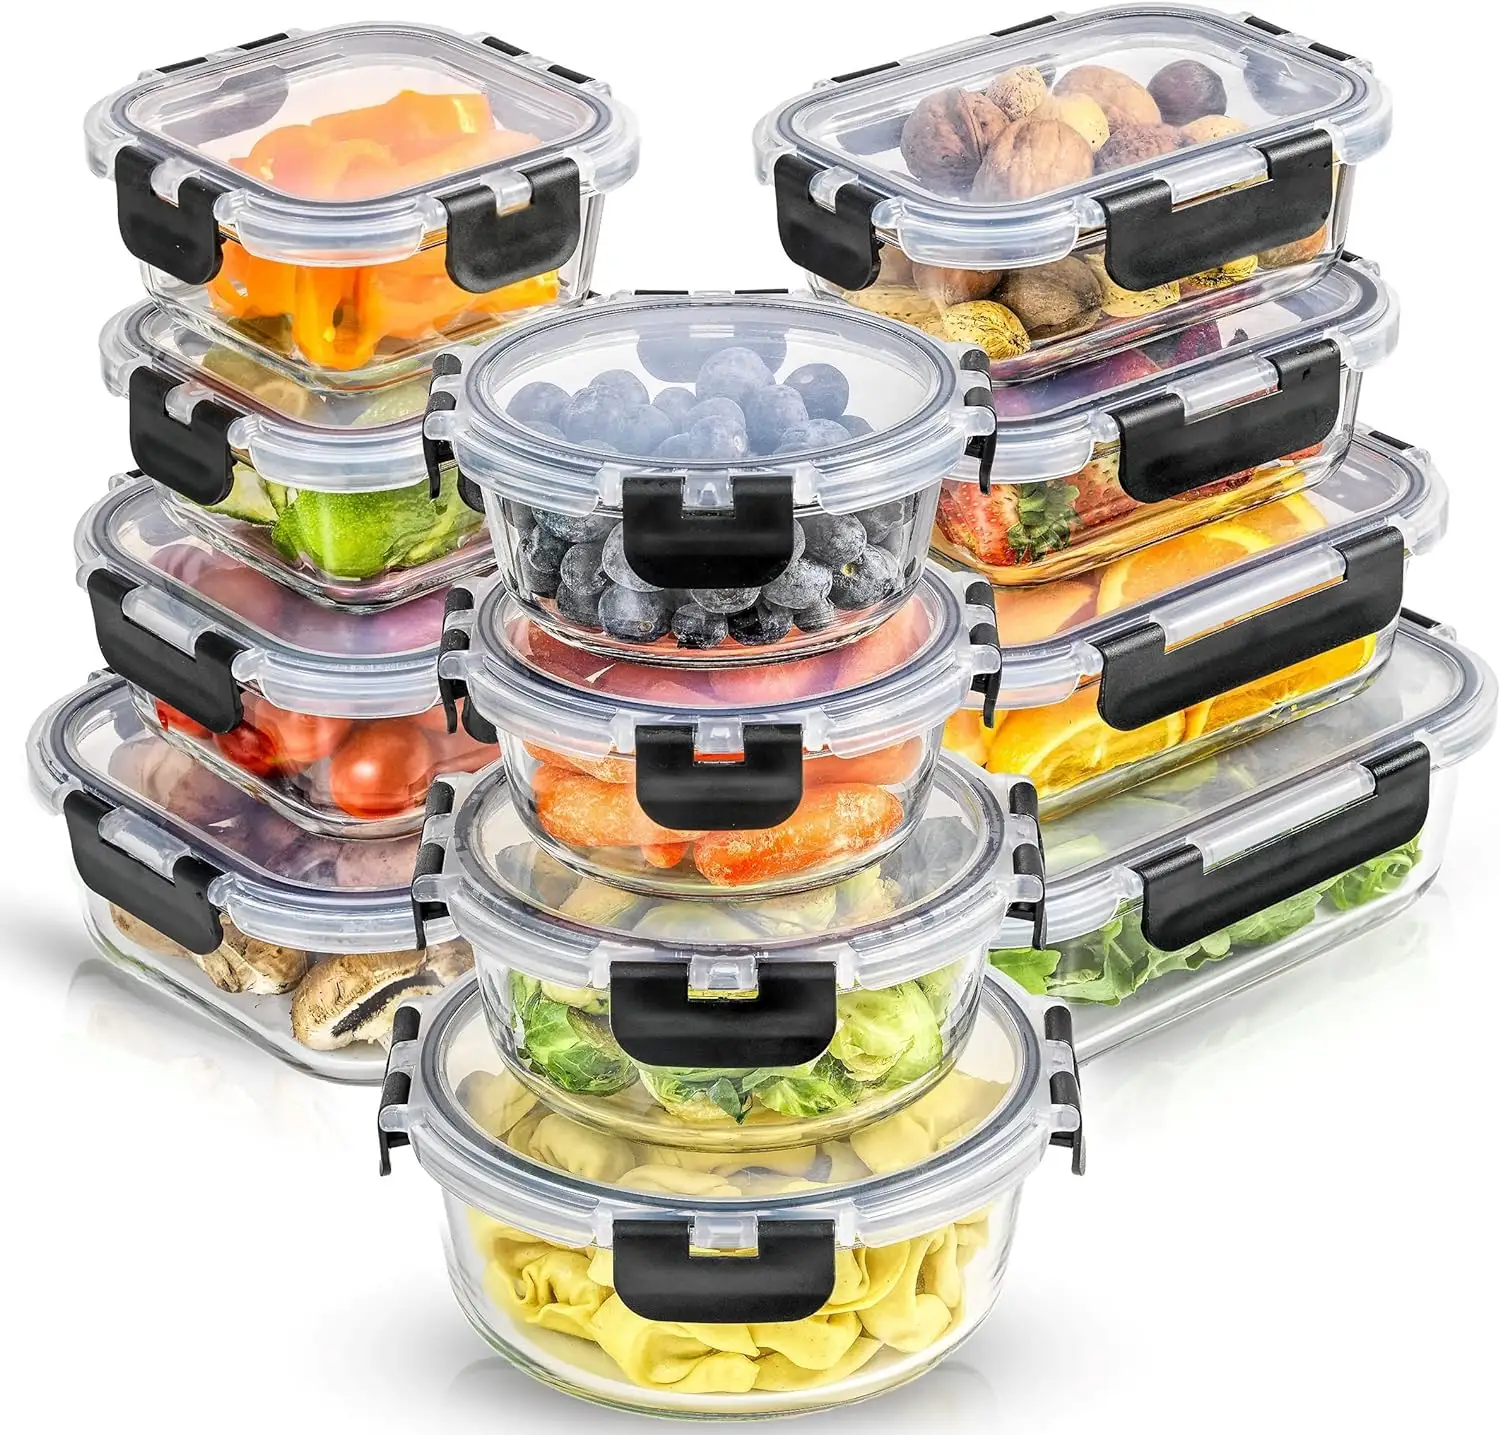 Airtight Freezer Dishwasher Safe BPA Free Glass Food Storage Meal Prep Containers Lunch Bento Boxes with Lids Vulcanus